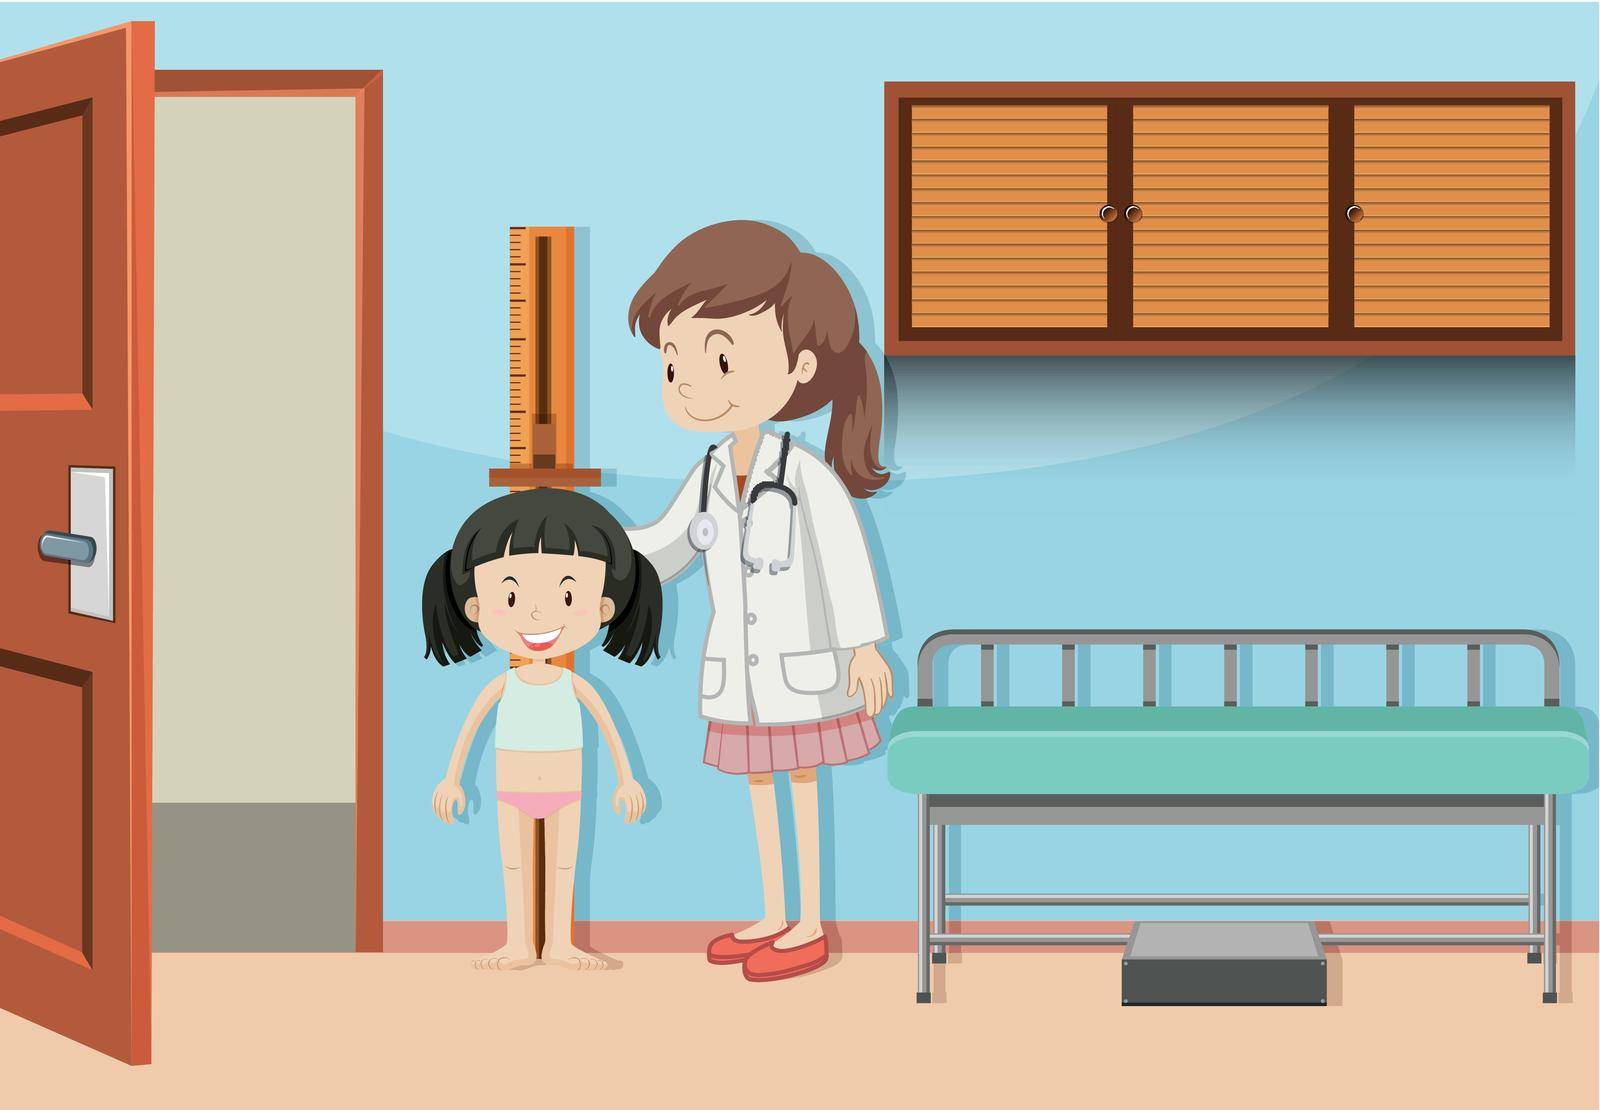 A Girl Measuring the Height illustration